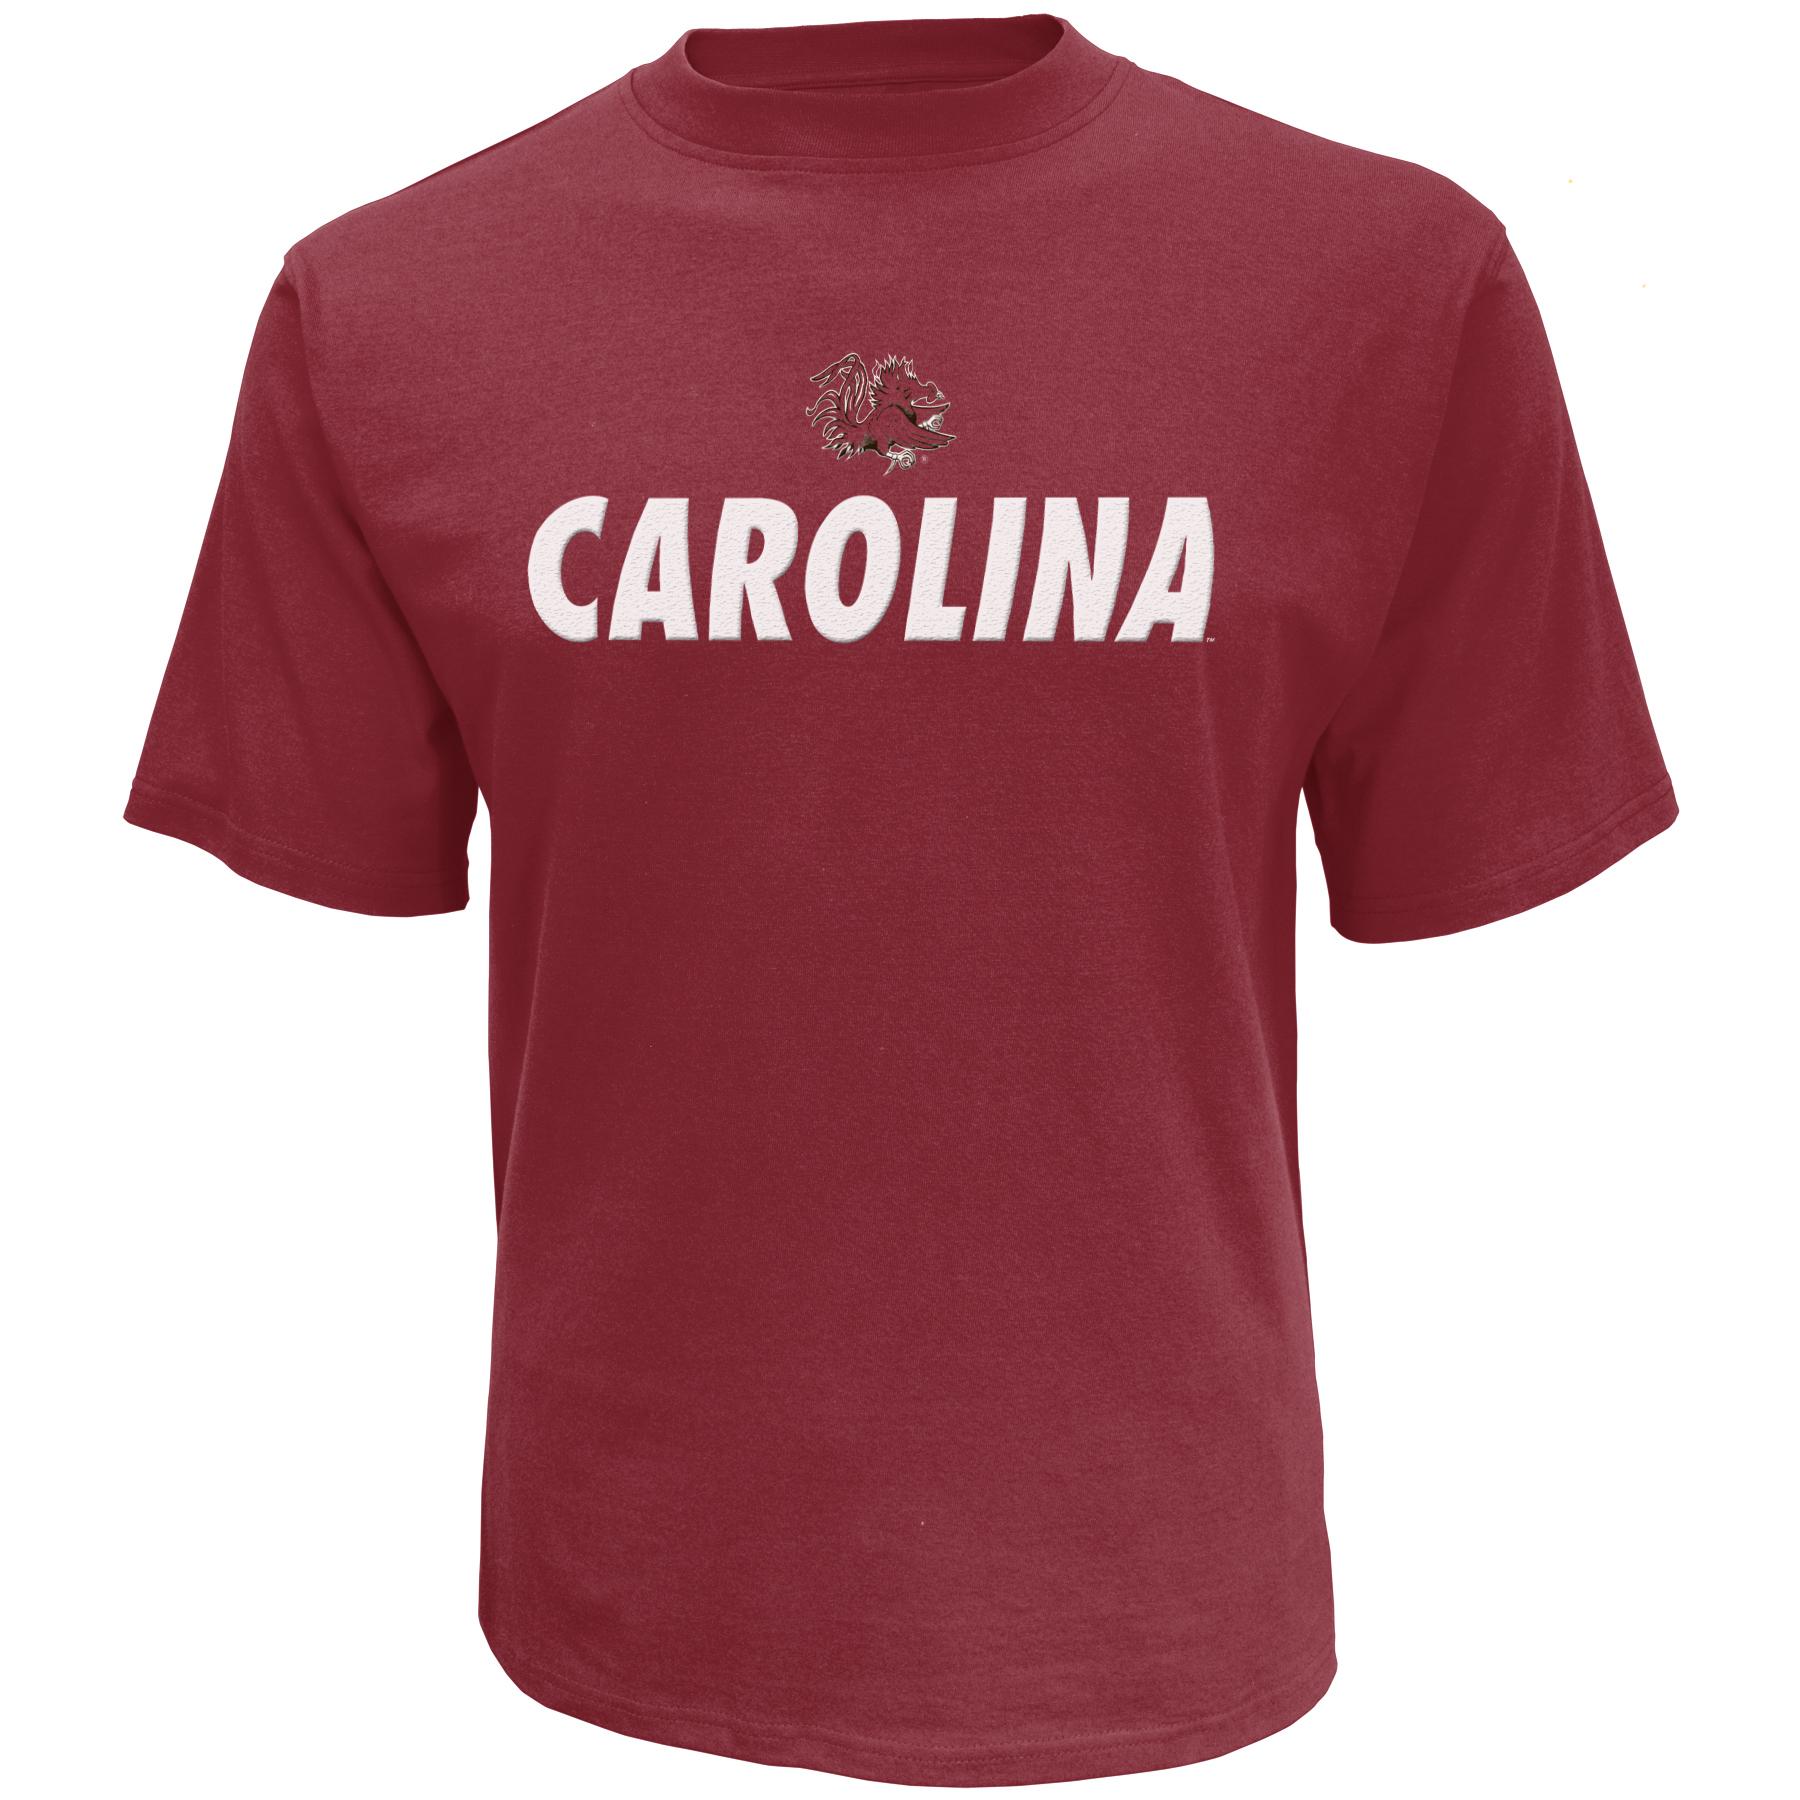 NCAA Men's Embroidered Graphic T-Shirt - South Carolina Gamecocks